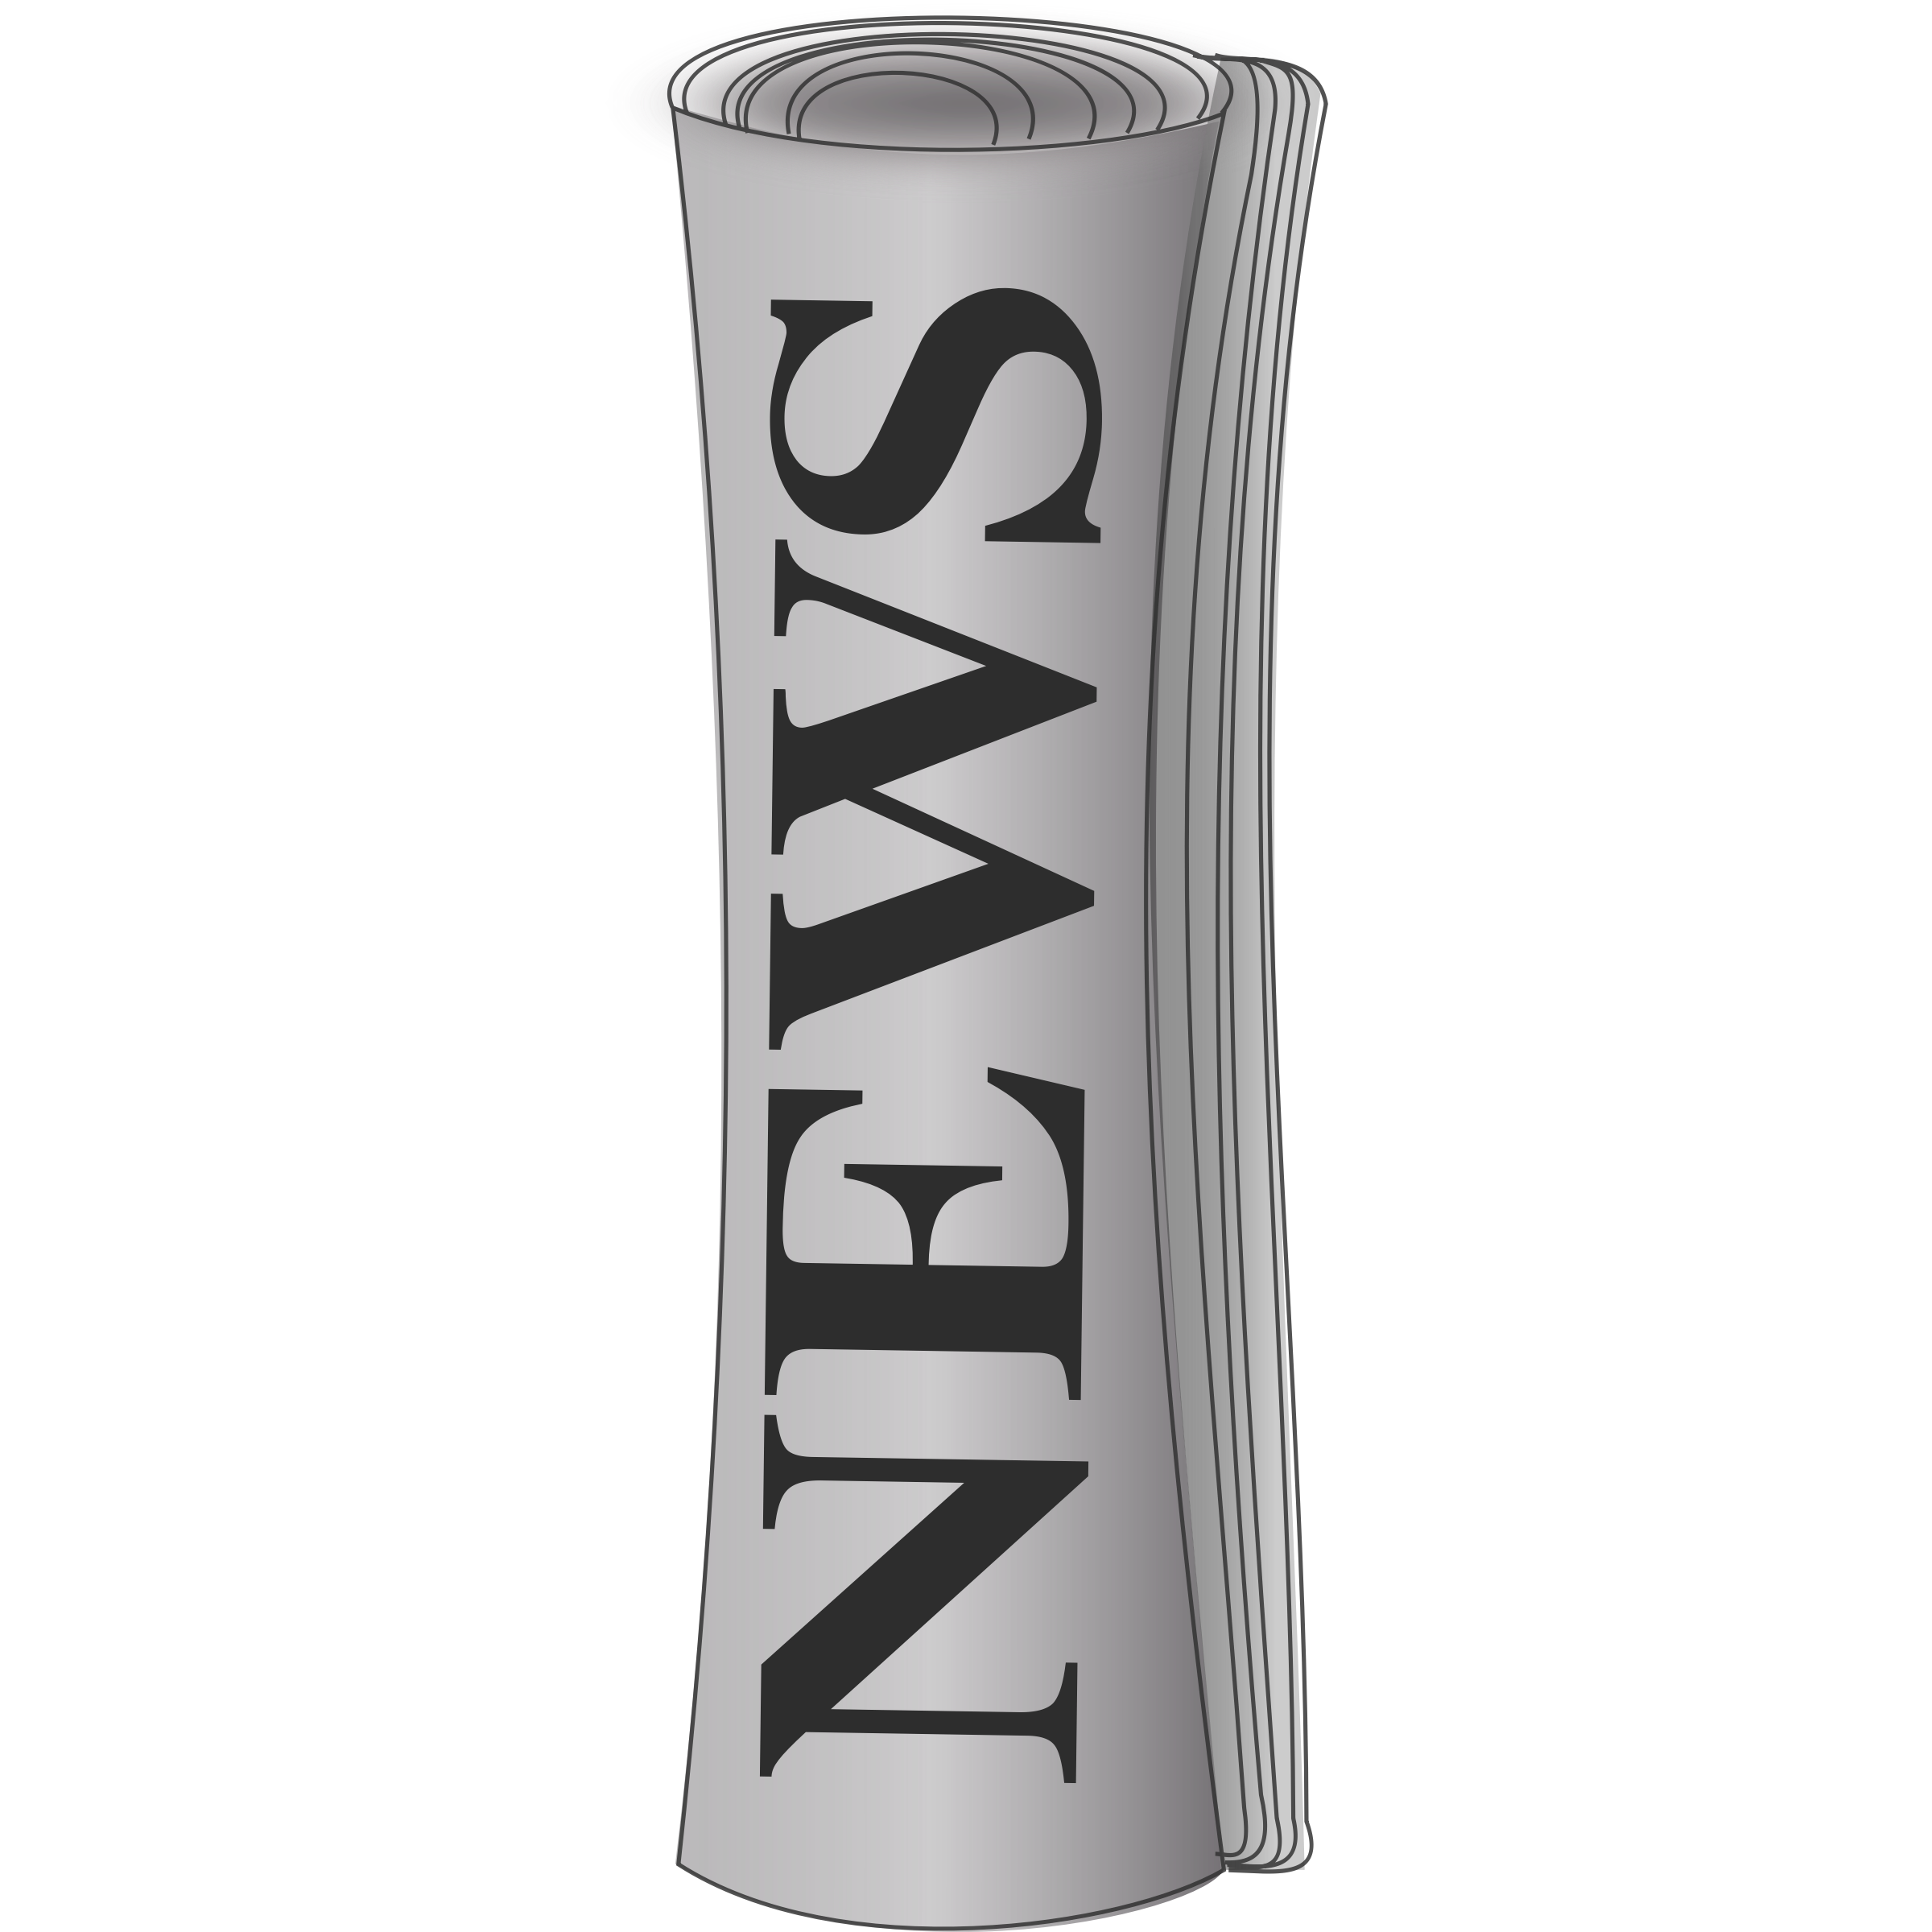 newspaper stand clipart - photo #10